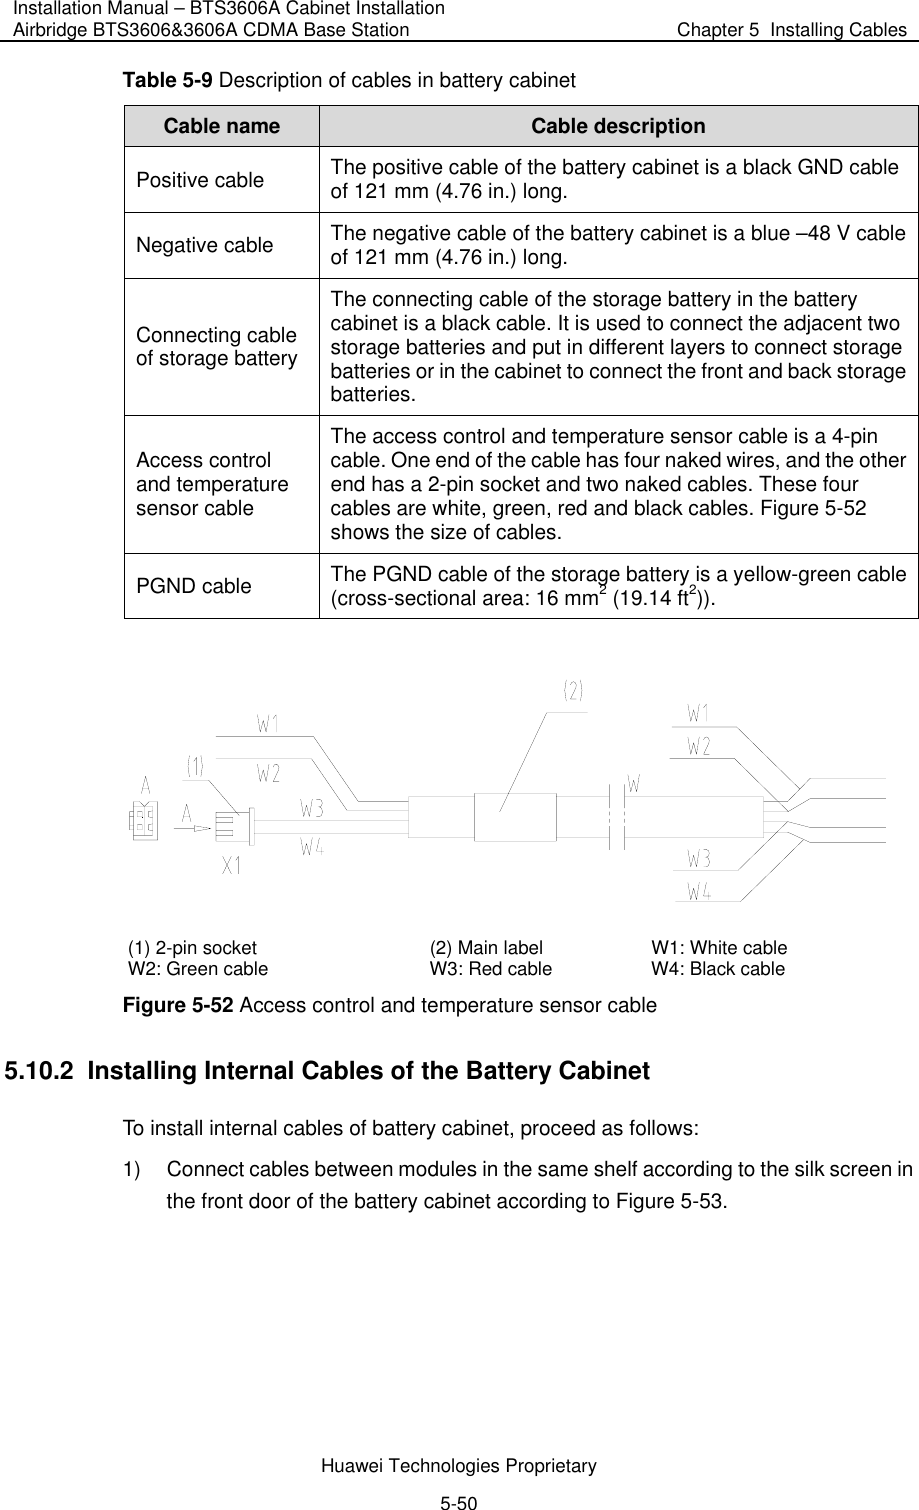 Installation Manual – BTS3606A Cabinet Installation Airbridge BTS3606&amp;3606A CDMA Base Station  Chapter 5  Installing Cables  Huawei Technologies Proprietary 5-50 Table 5-9 Description of cables in battery cabinet Cable name  Cable description Positive cable  The positive cable of the battery cabinet is a black GND cable of 121 mm (4.76 in.) long.  Negative cable  The negative cable of the battery cabinet is a blue –48 V cable of 121 mm (4.76 in.) long.  Connecting cable of storage battery The connecting cable of the storage battery in the battery cabinet is a black cable. It is used to connect the adjacent two storage batteries and put in different layers to connect storage batteries or in the cabinet to connect the front and back storage batteries.  Access control and temperature sensor cable The access control and temperature sensor cable is a 4-pin cable. One end of the cable has four naked wires, and the other end has a 2-pin socket and two naked cables. These four cables are white, green, red and black cables. Figure 5-52 shows the size of cables. PGND cable   The PGND cable of the storage battery is a yellow-green cable (cross-sectional area: 16 mm2 (19.14 ft2)).   (1) 2-pin socket  (2) Main label  W1: White cable W2: Green cable  W3: Red cable  W4: Black cable Figure 5-52 Access control and temperature sensor cable 5.10.2  Installing Internal Cables of the Battery Cabinet To install internal cables of battery cabinet, proceed as follows: 1)  Connect cables between modules in the same shelf according to the silk screen in the front door of the battery cabinet according to Figure 5-53.  